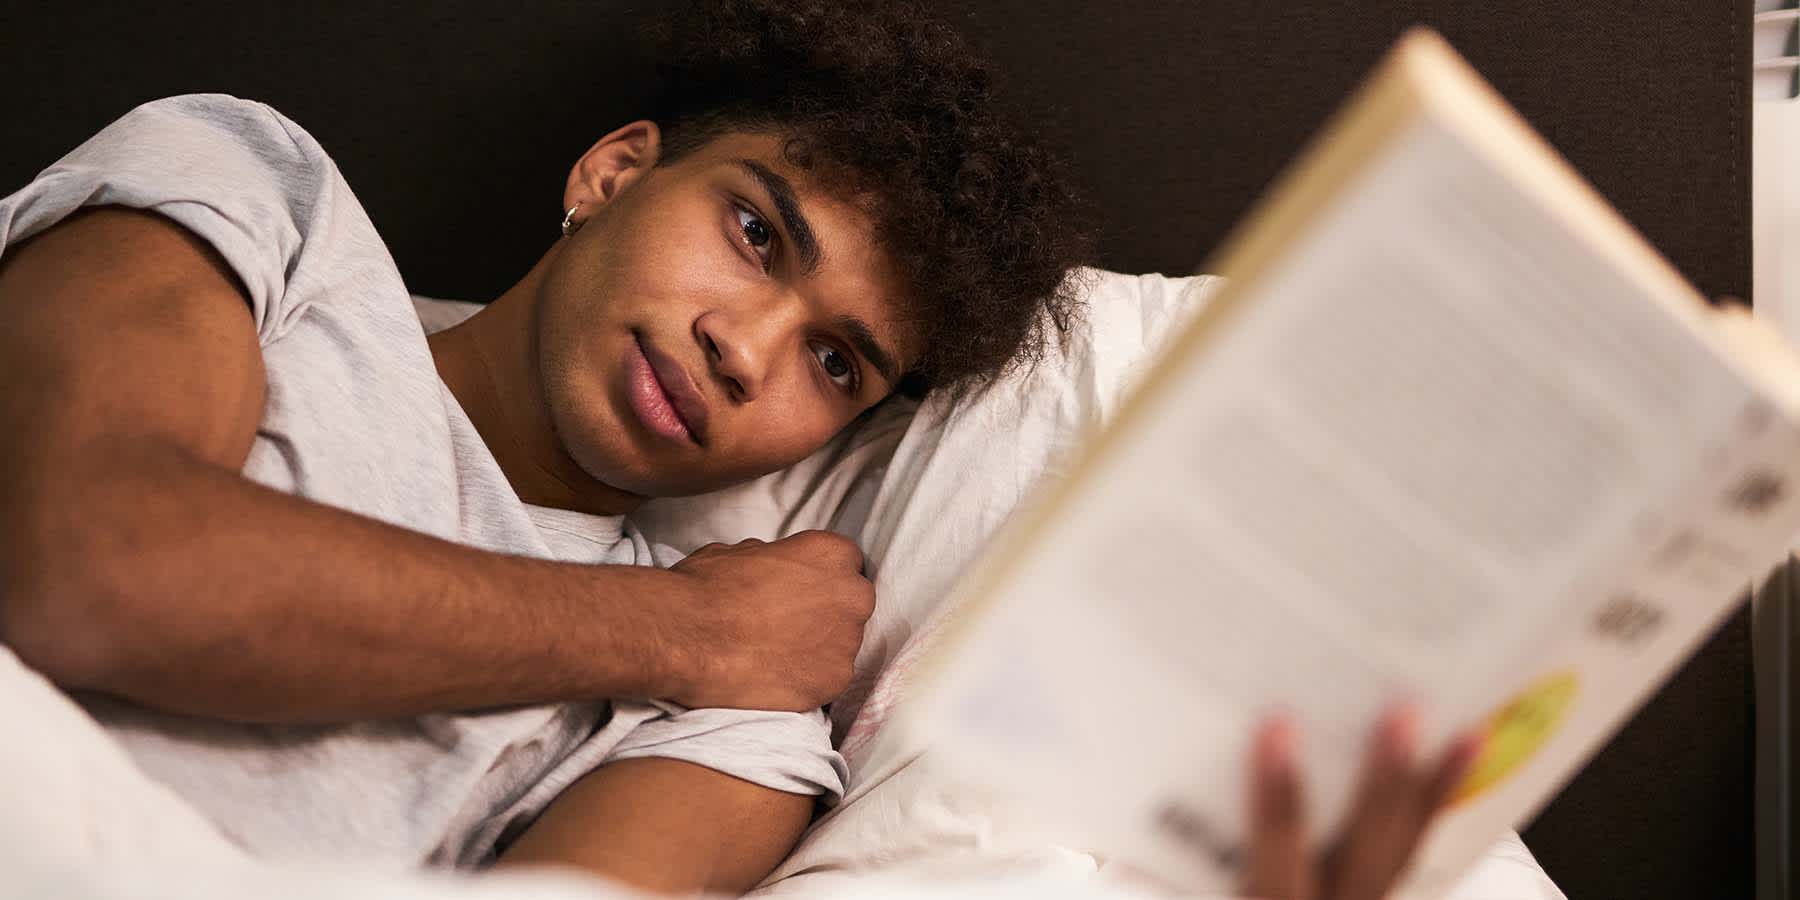 Young man with melatonin deficiency unable to sleep and reading a book in bed